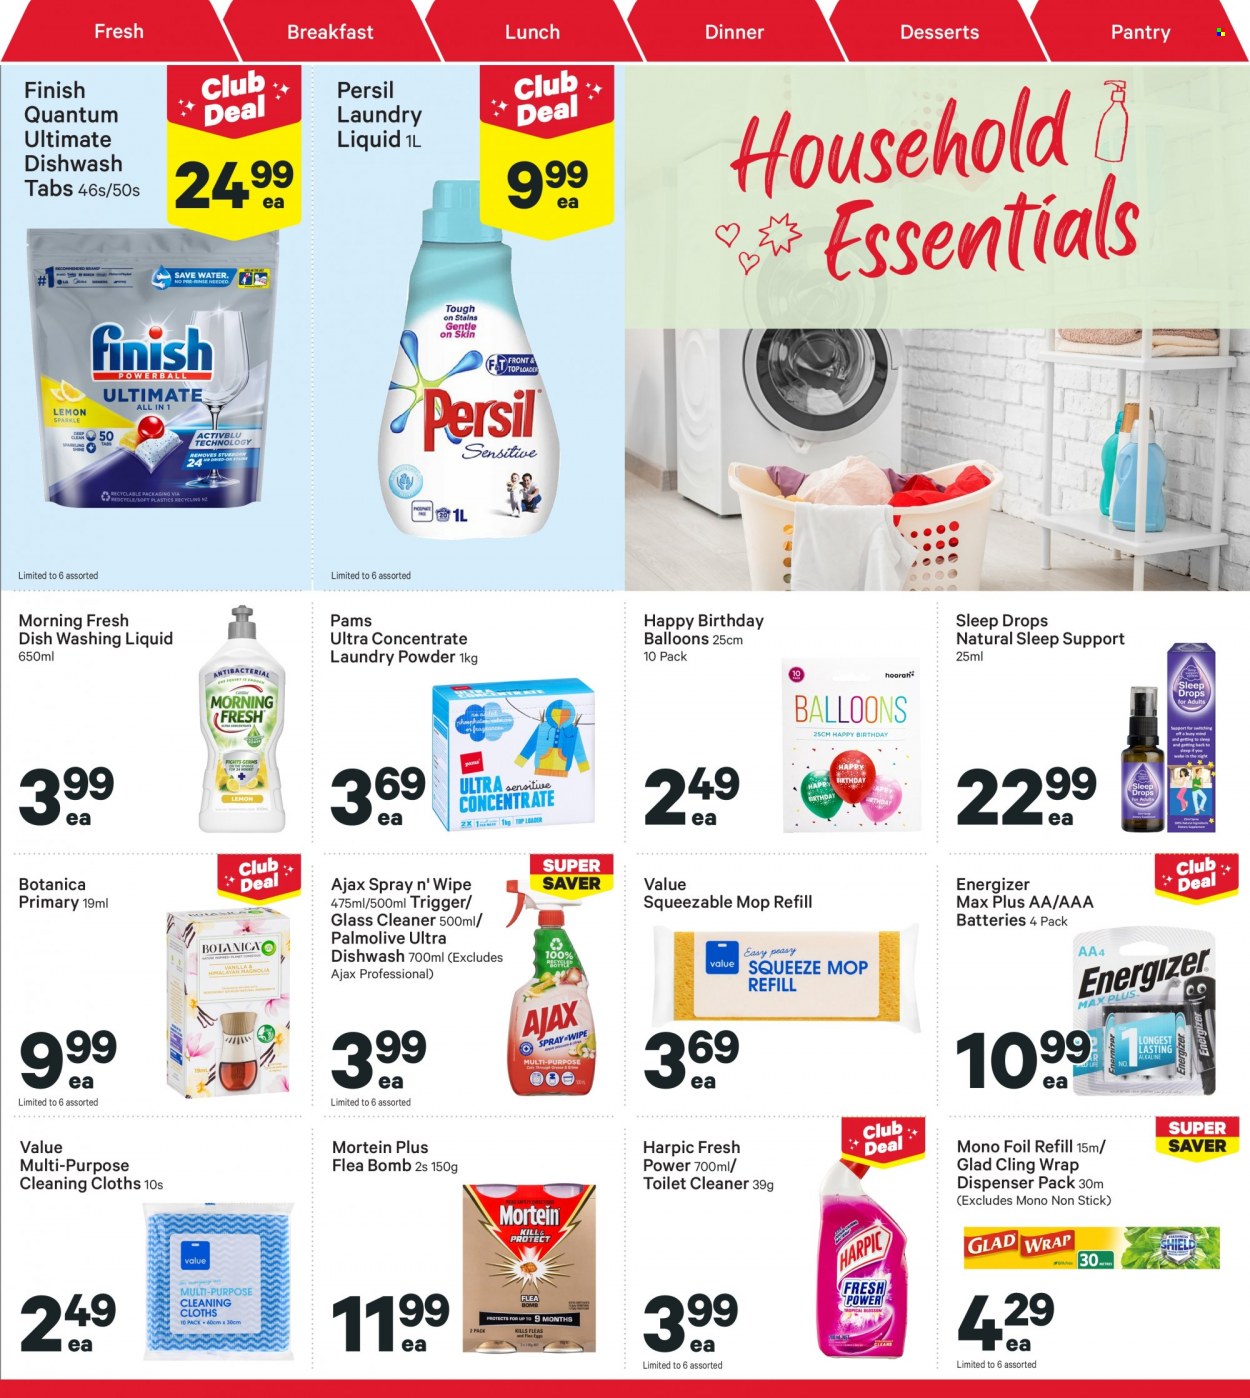 thumbnail - New World mailer - 28.11.2022 - 04.12.2022 - Sales products - cleaner, toilet cleaner, Mortein, glass cleaner, Harpic, Ajax, Persil, laundry detergent, laundry powder, dishwashing liquid, Finish Powerball, Finish Quantum Ultimate, Palmolive, mop pad, dispenser, balloons, battery, Energizer, AAA batteries. Page 31.